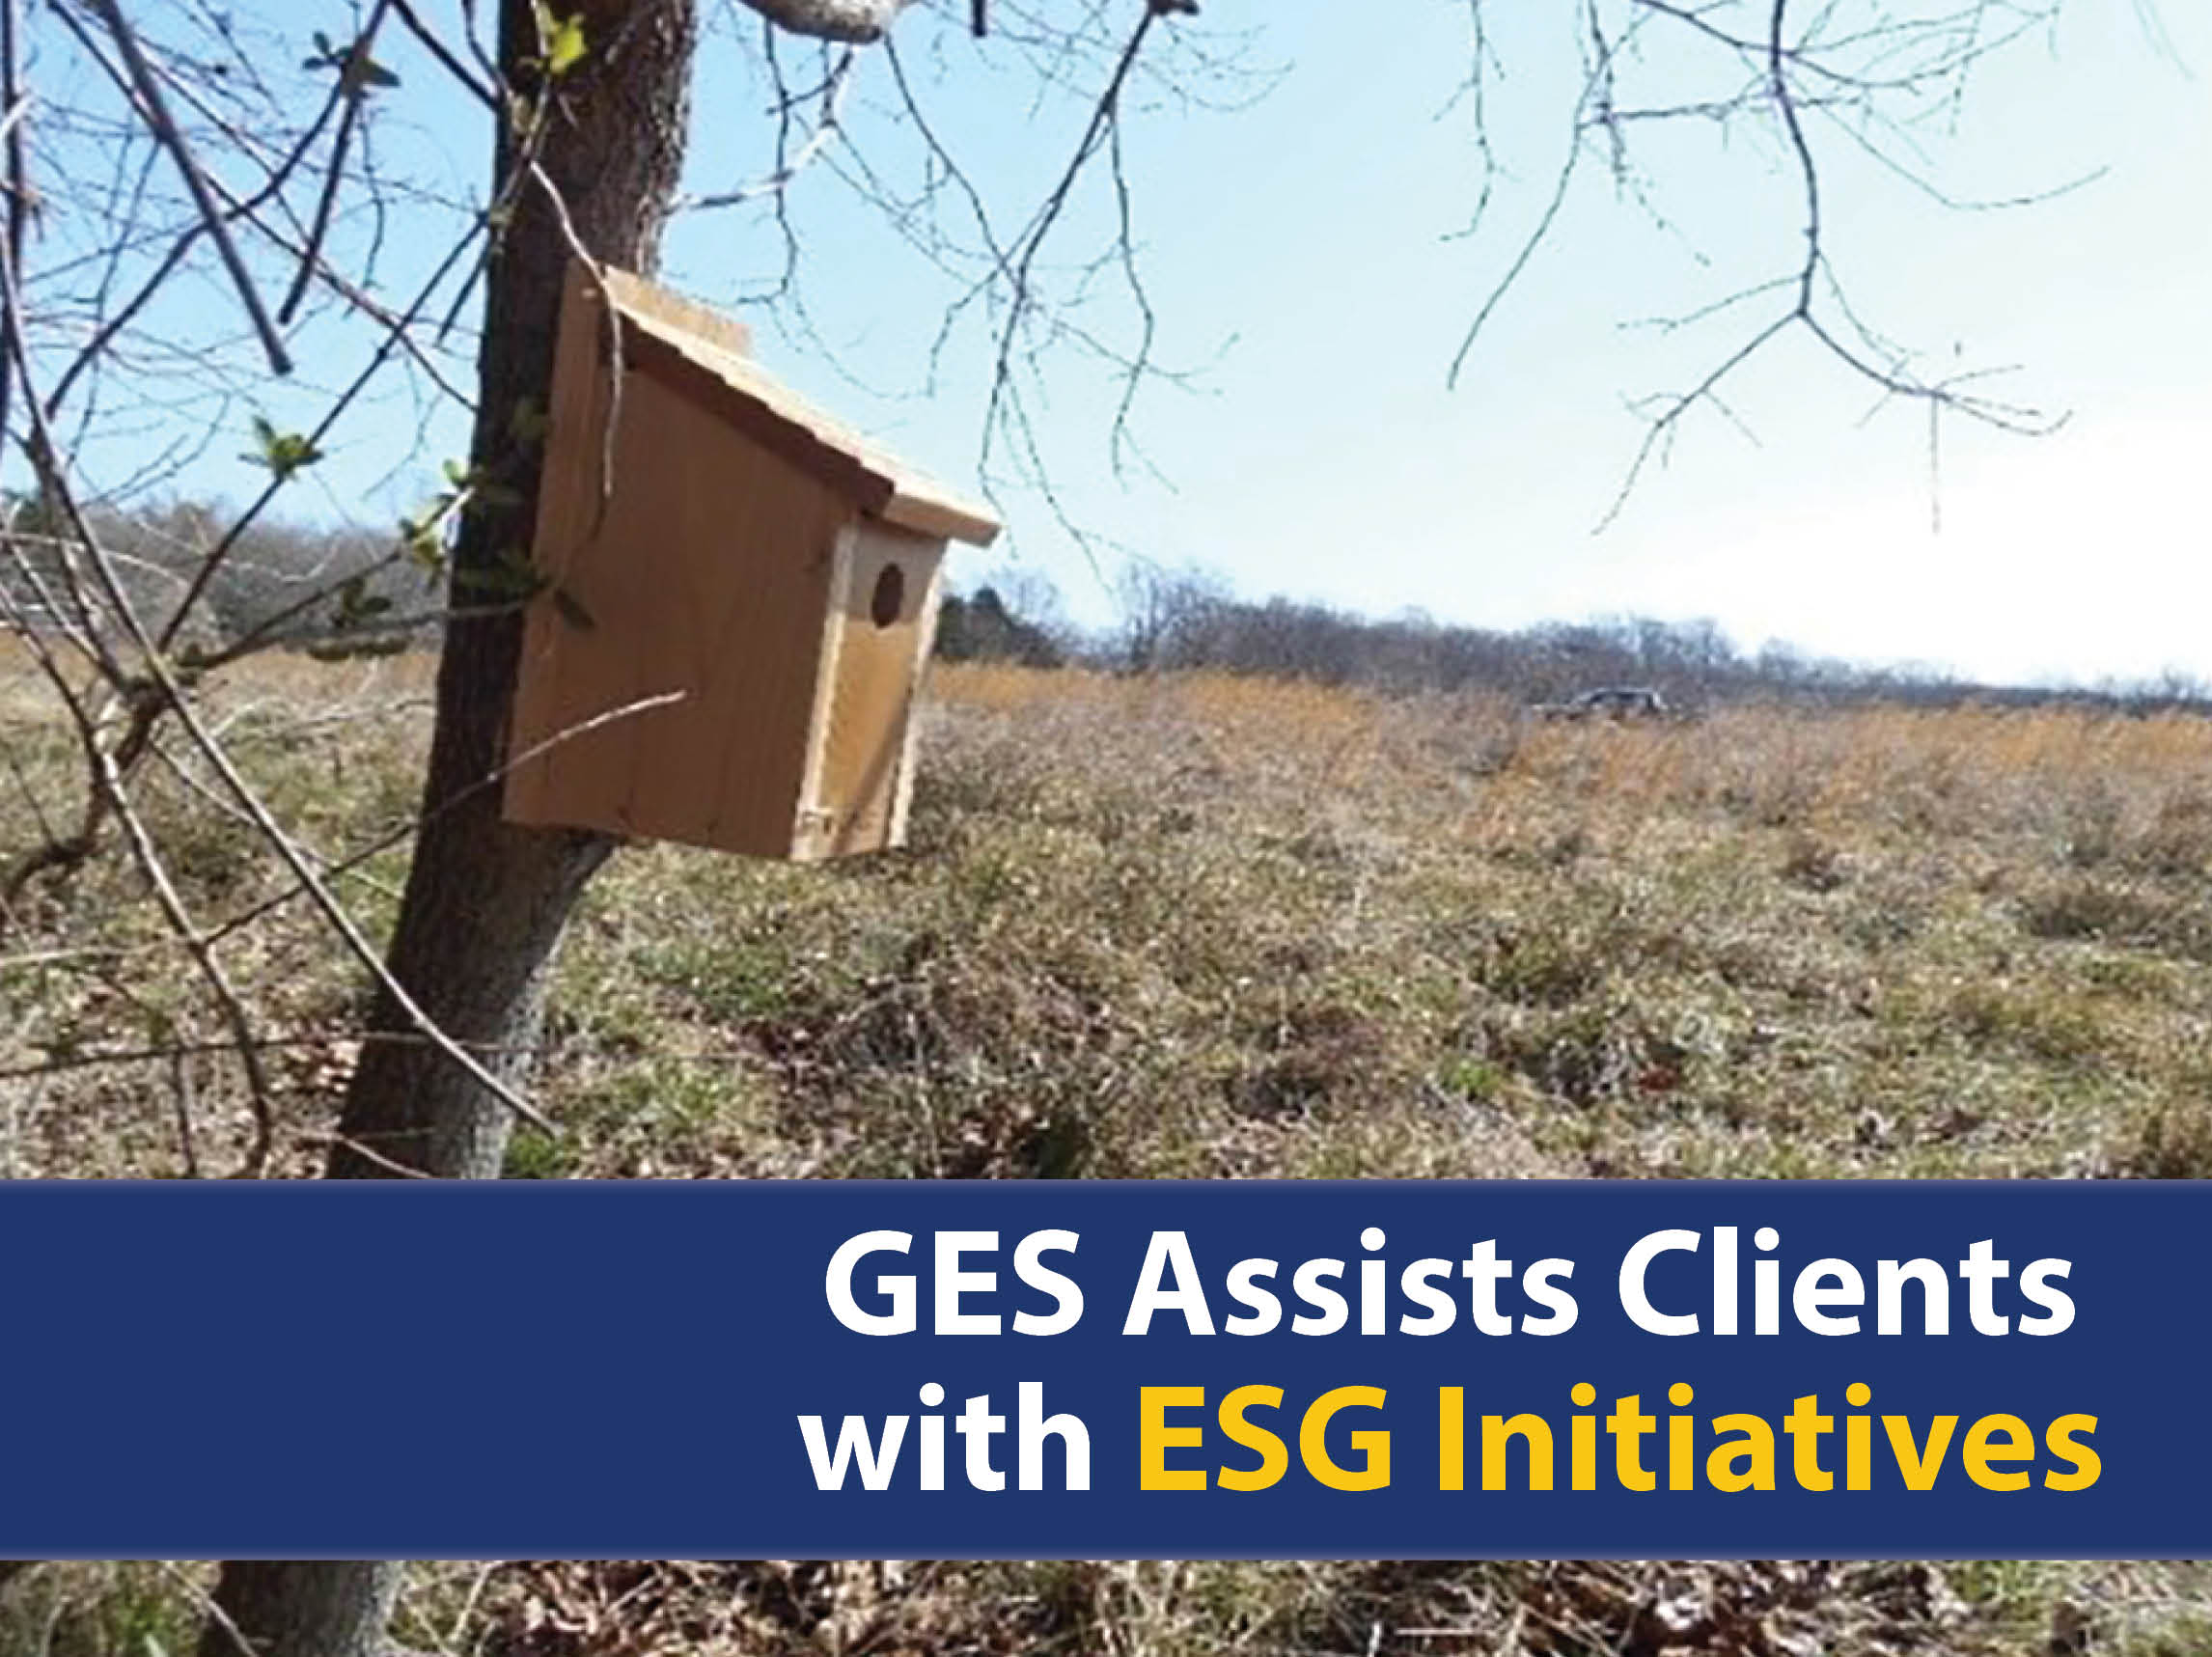 GES Assists Clients with ESG Initiatives